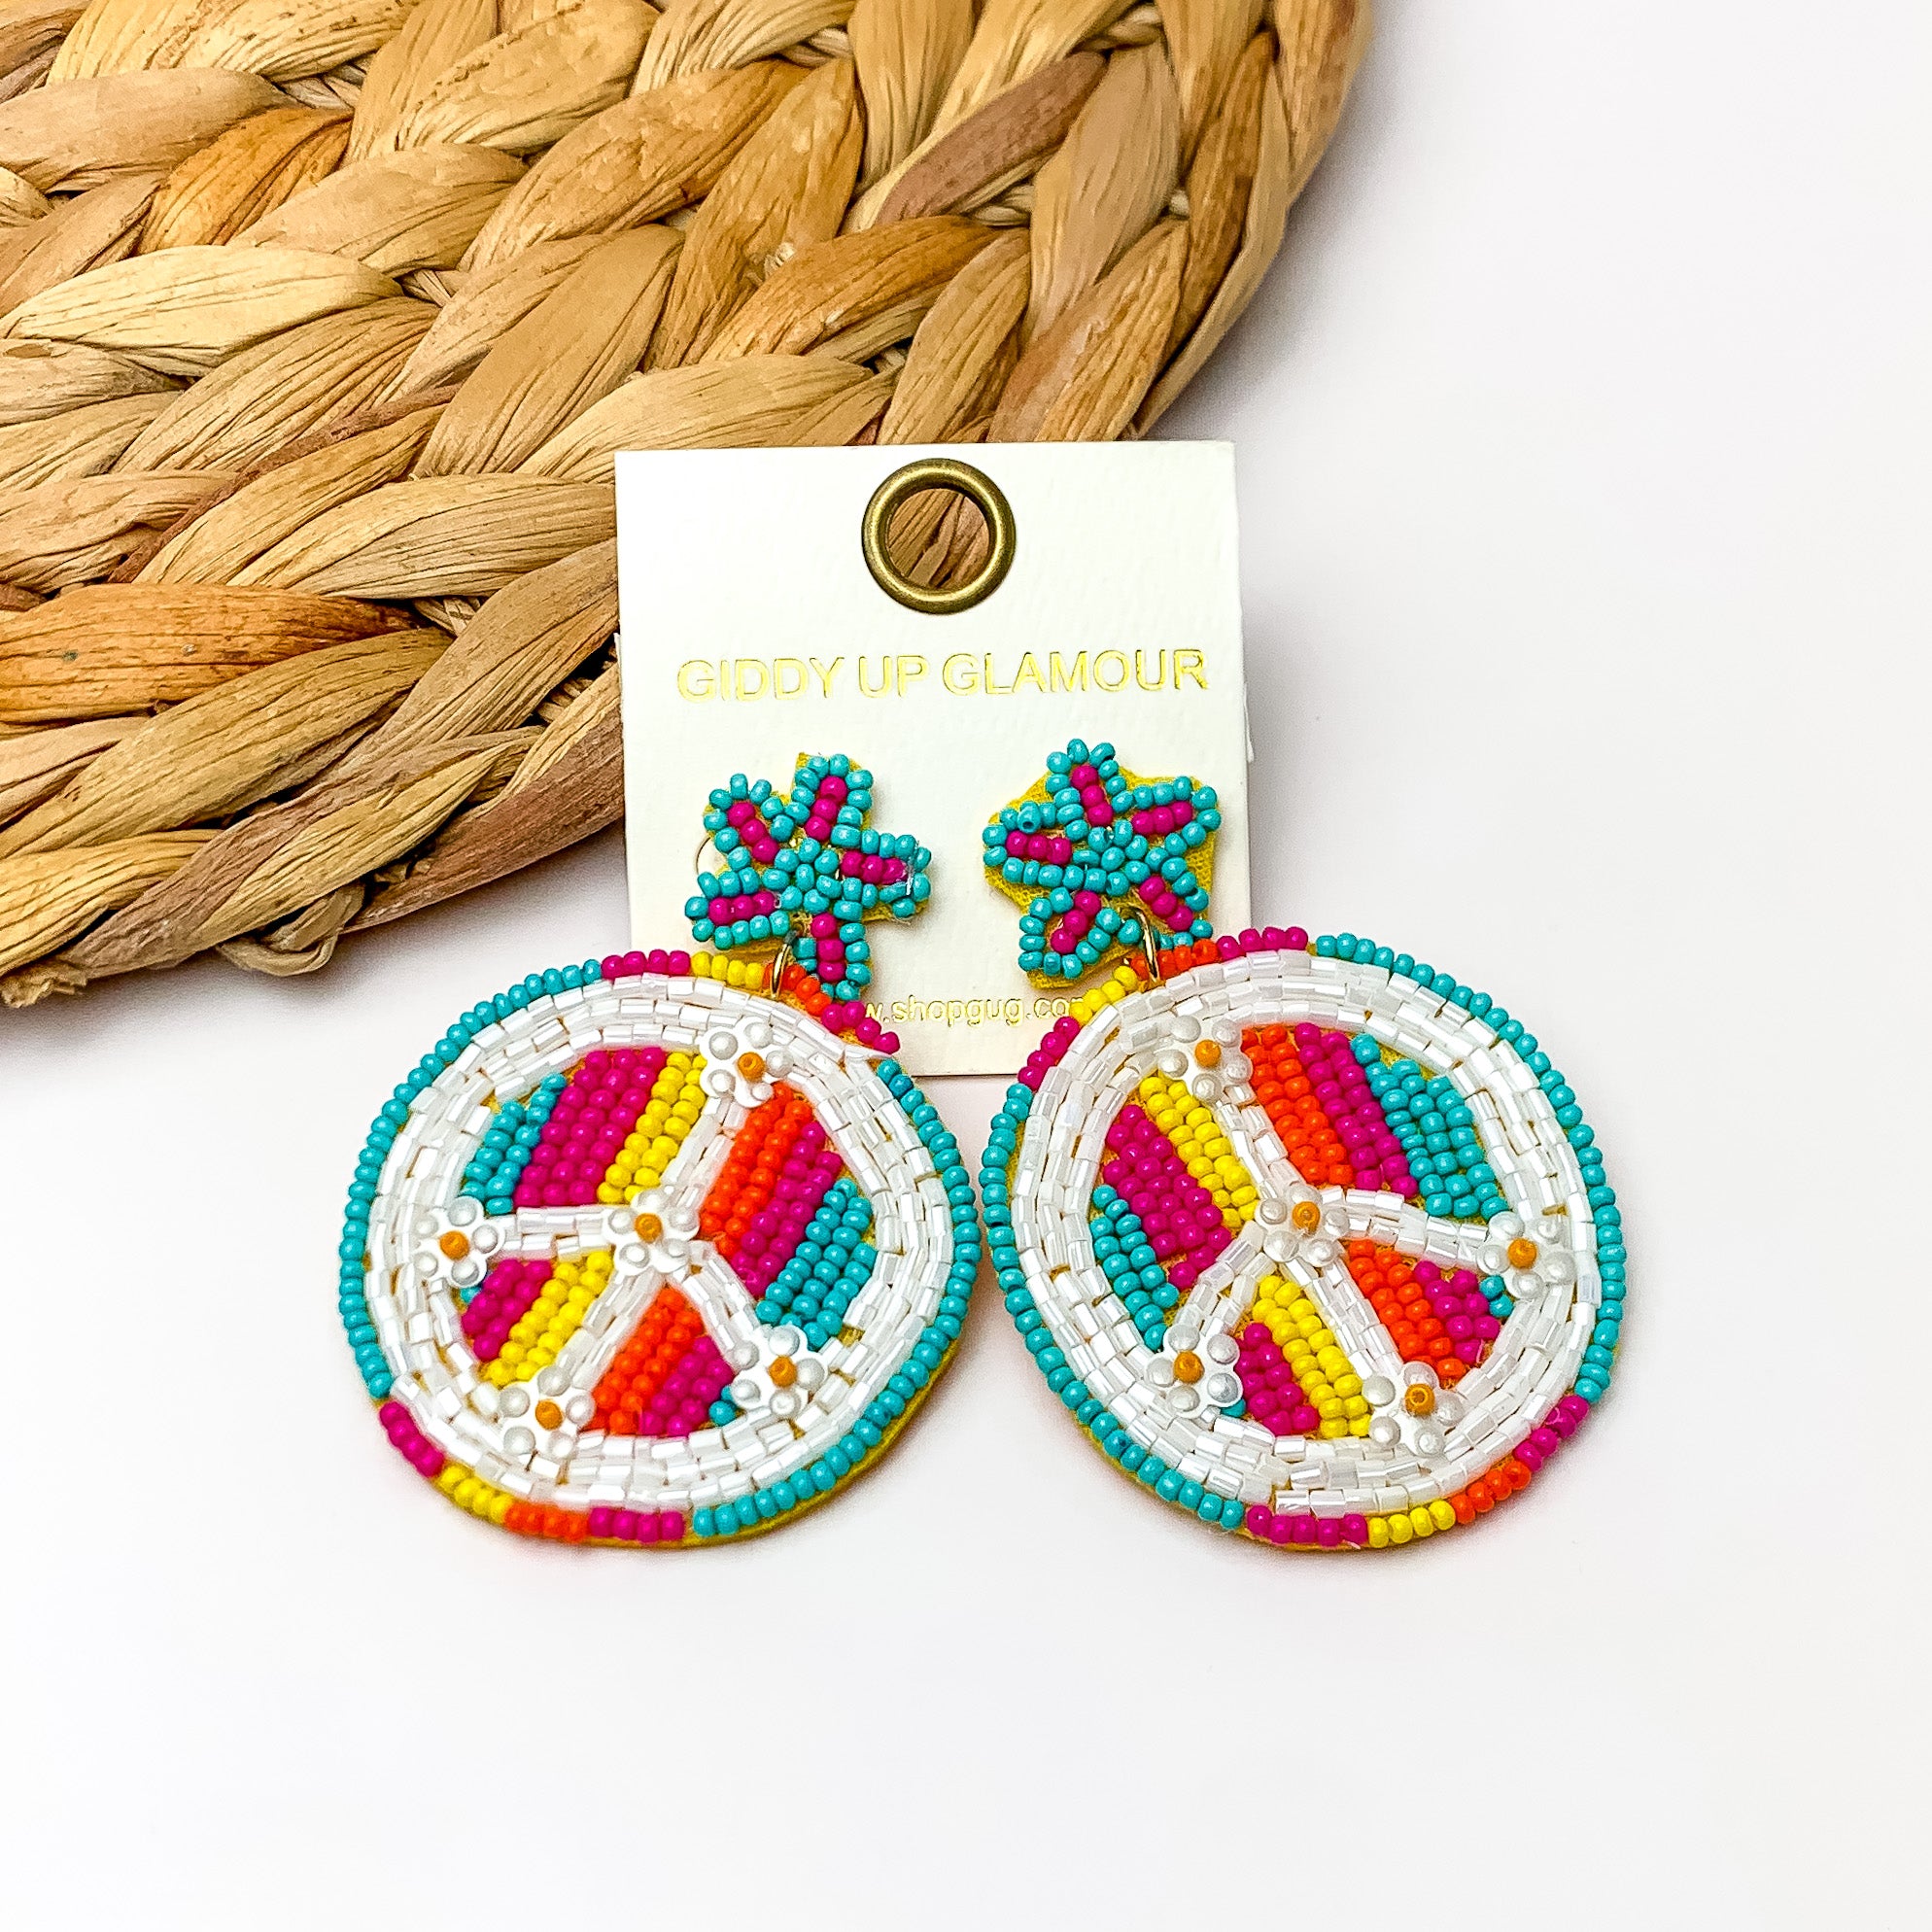 Beaded Peace sign Earrings With Star Post in Multicolor. Pictured on a white background with a wood like decoration in the top left corner.